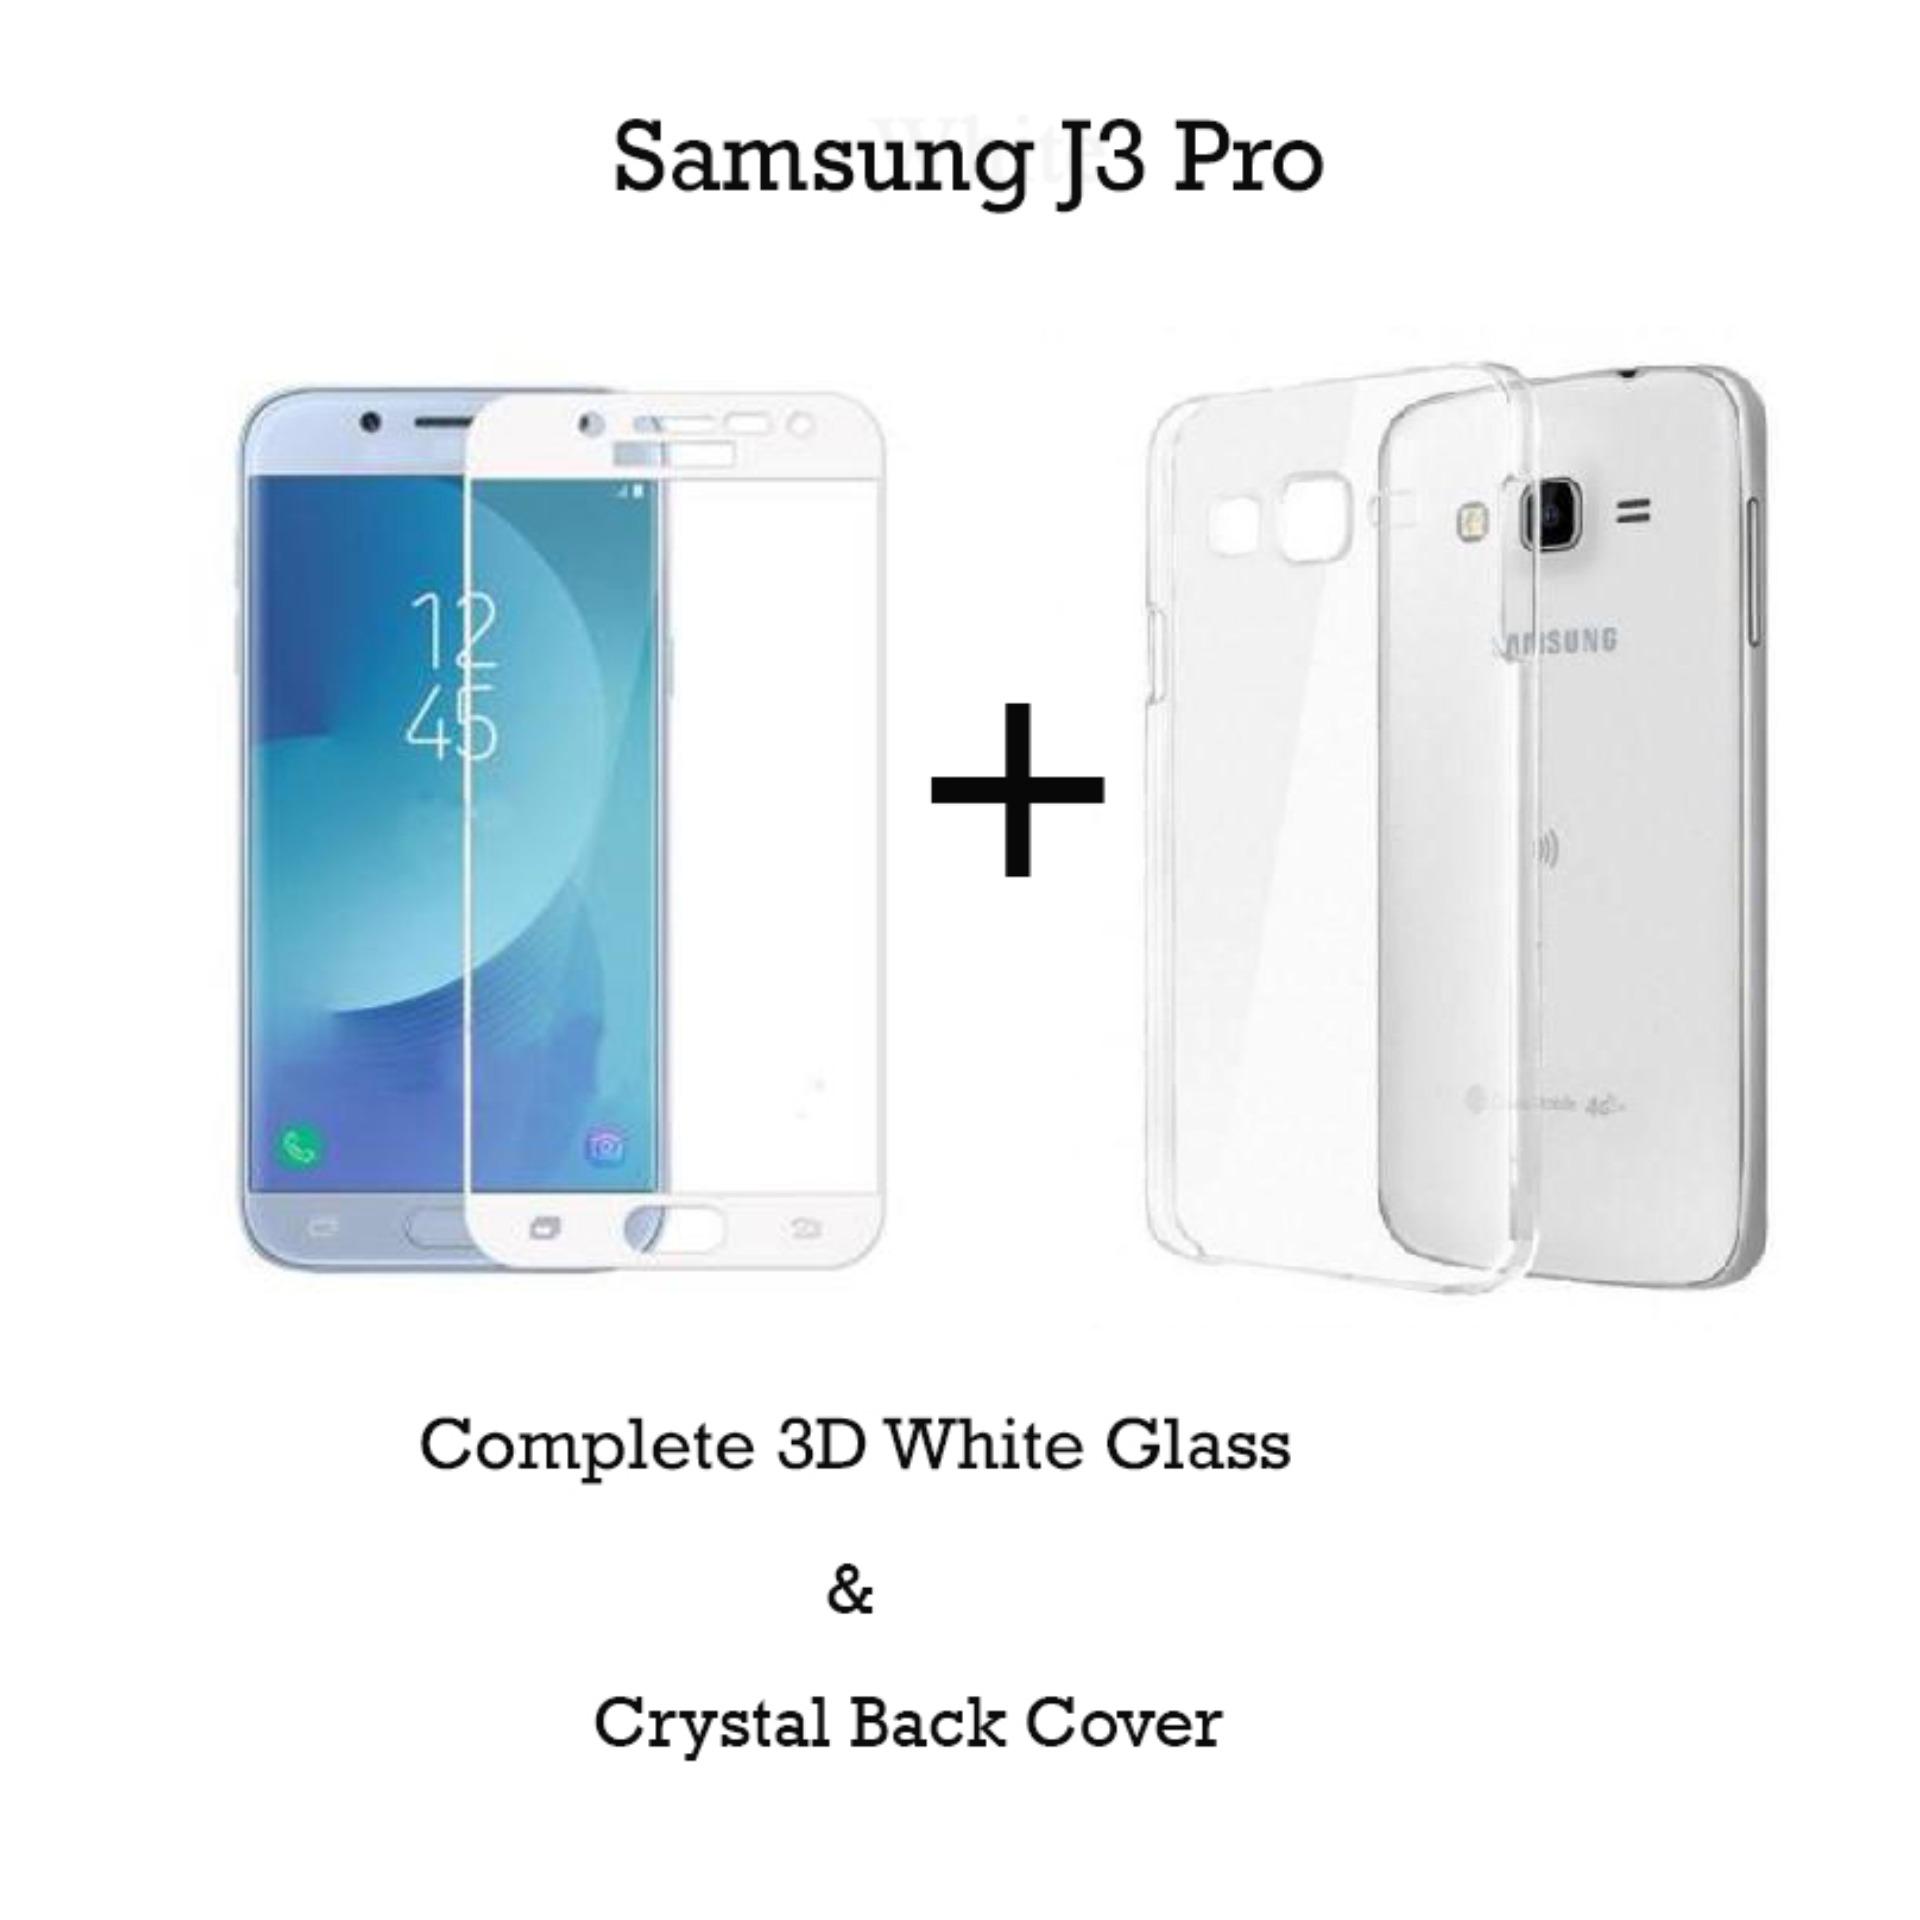 Samsung Galaxy J3 Pro 17 White Complete Full Screen Tempered Glass Protector 3d For Samsung J3 Pro 17 Back Transparent Cover For Samsung J3 Pro 17 Buy Online At Best Prices